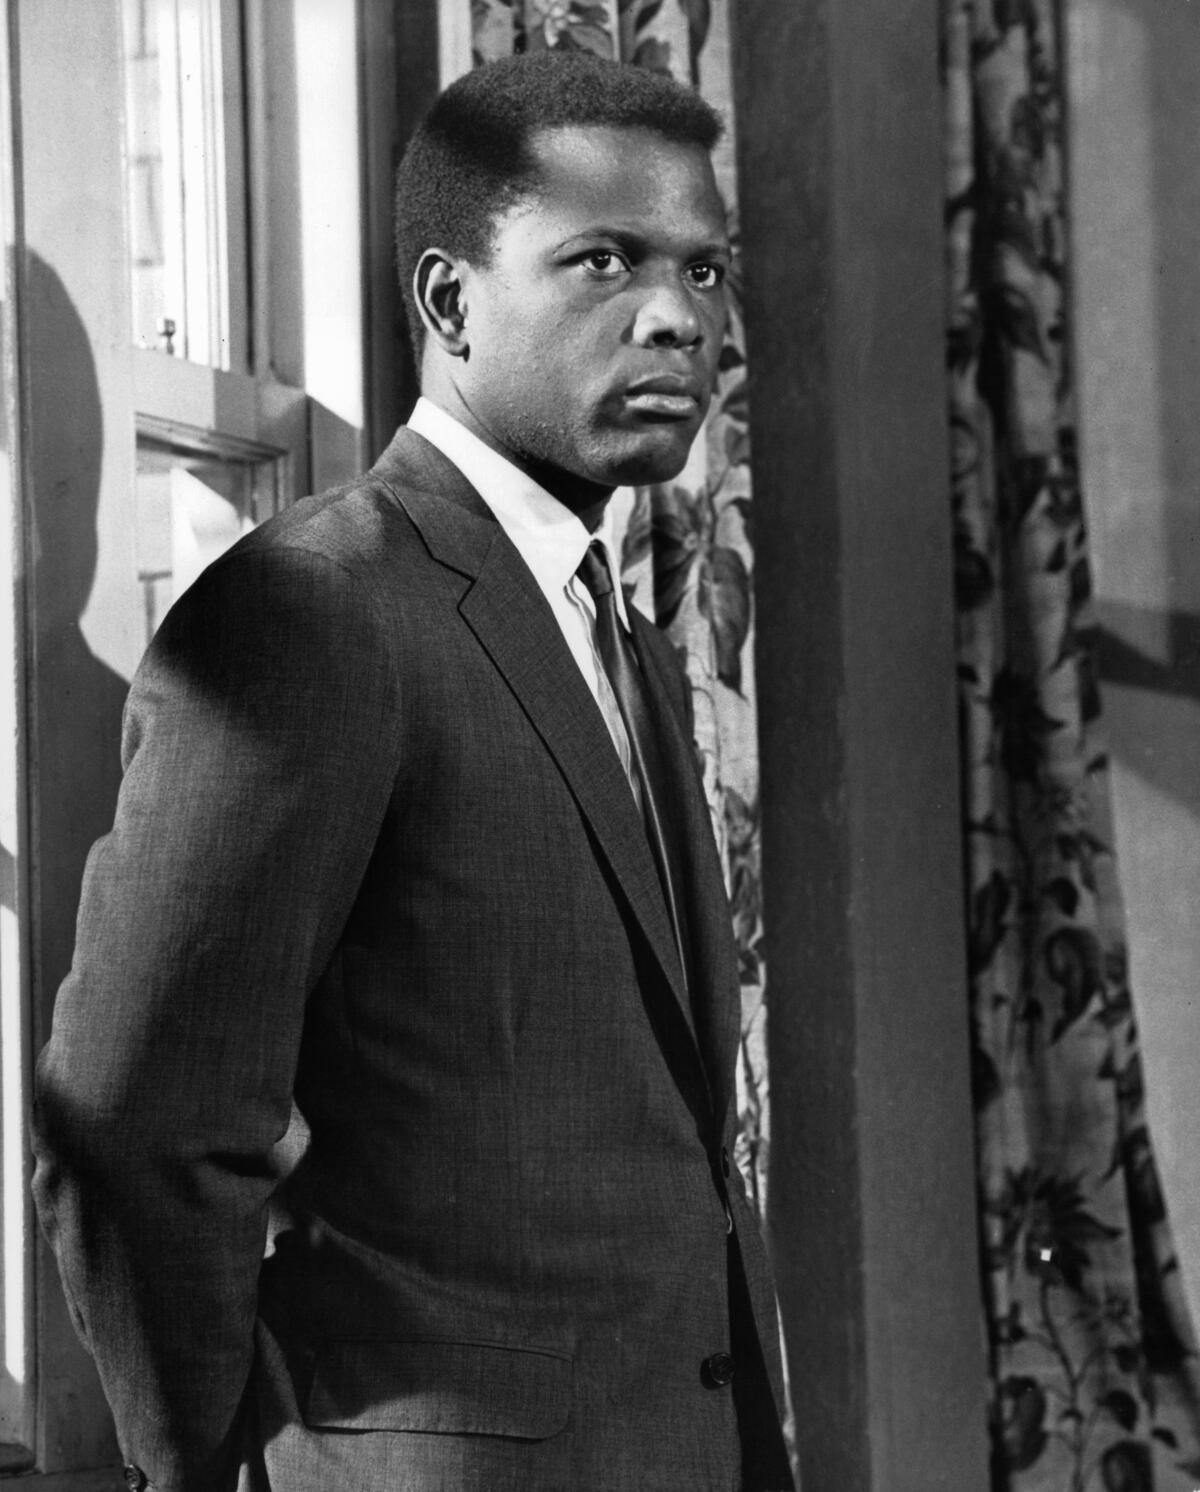 Sidney Poitier stands in an open doorway in a scene from the film 'To Sir, With Love” (1967)